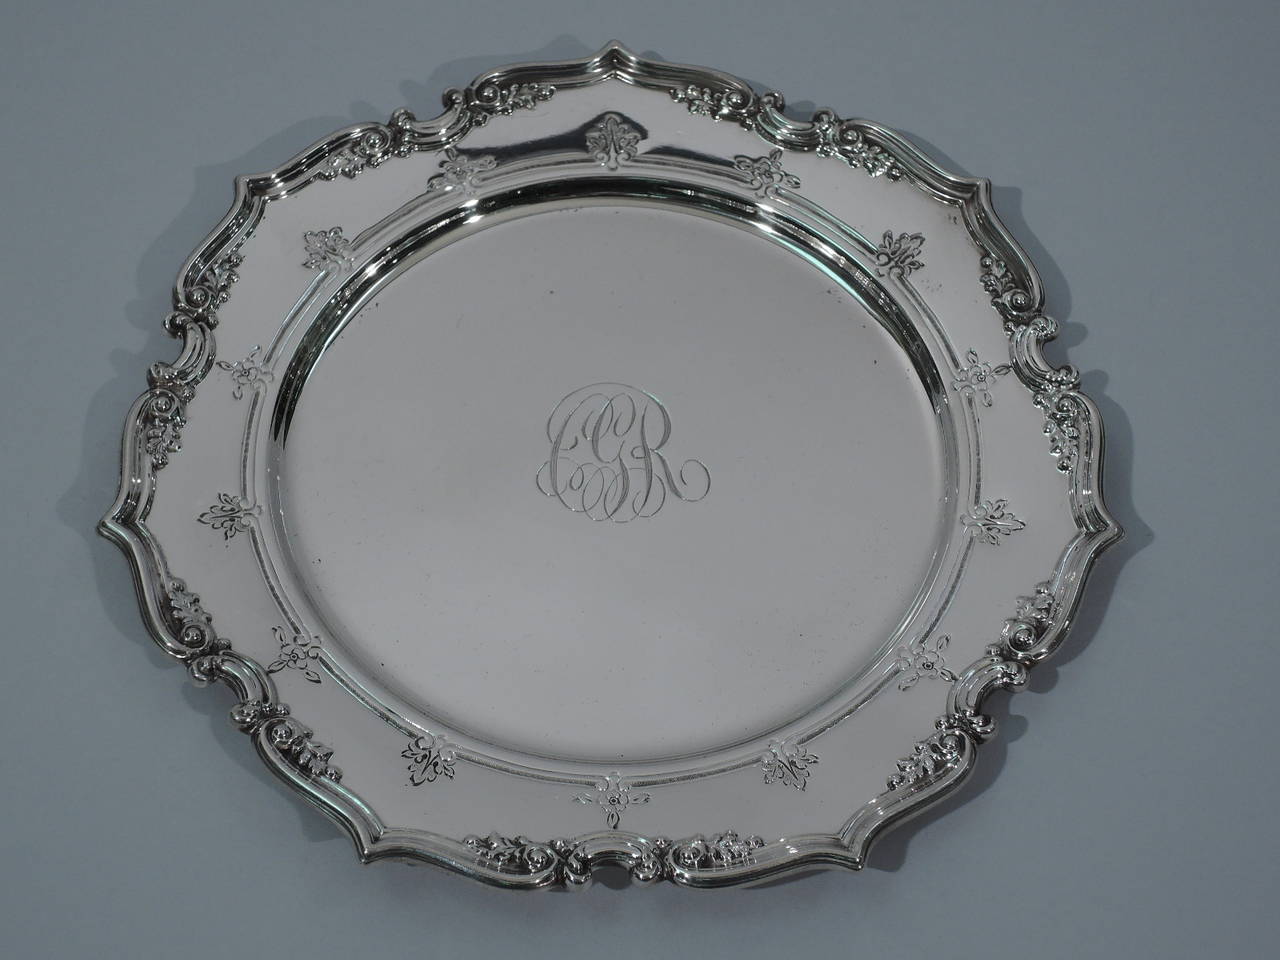 Set of 12 Gorham Sterling Silver Bread and Butter Plates with Fancy Scrolls 2